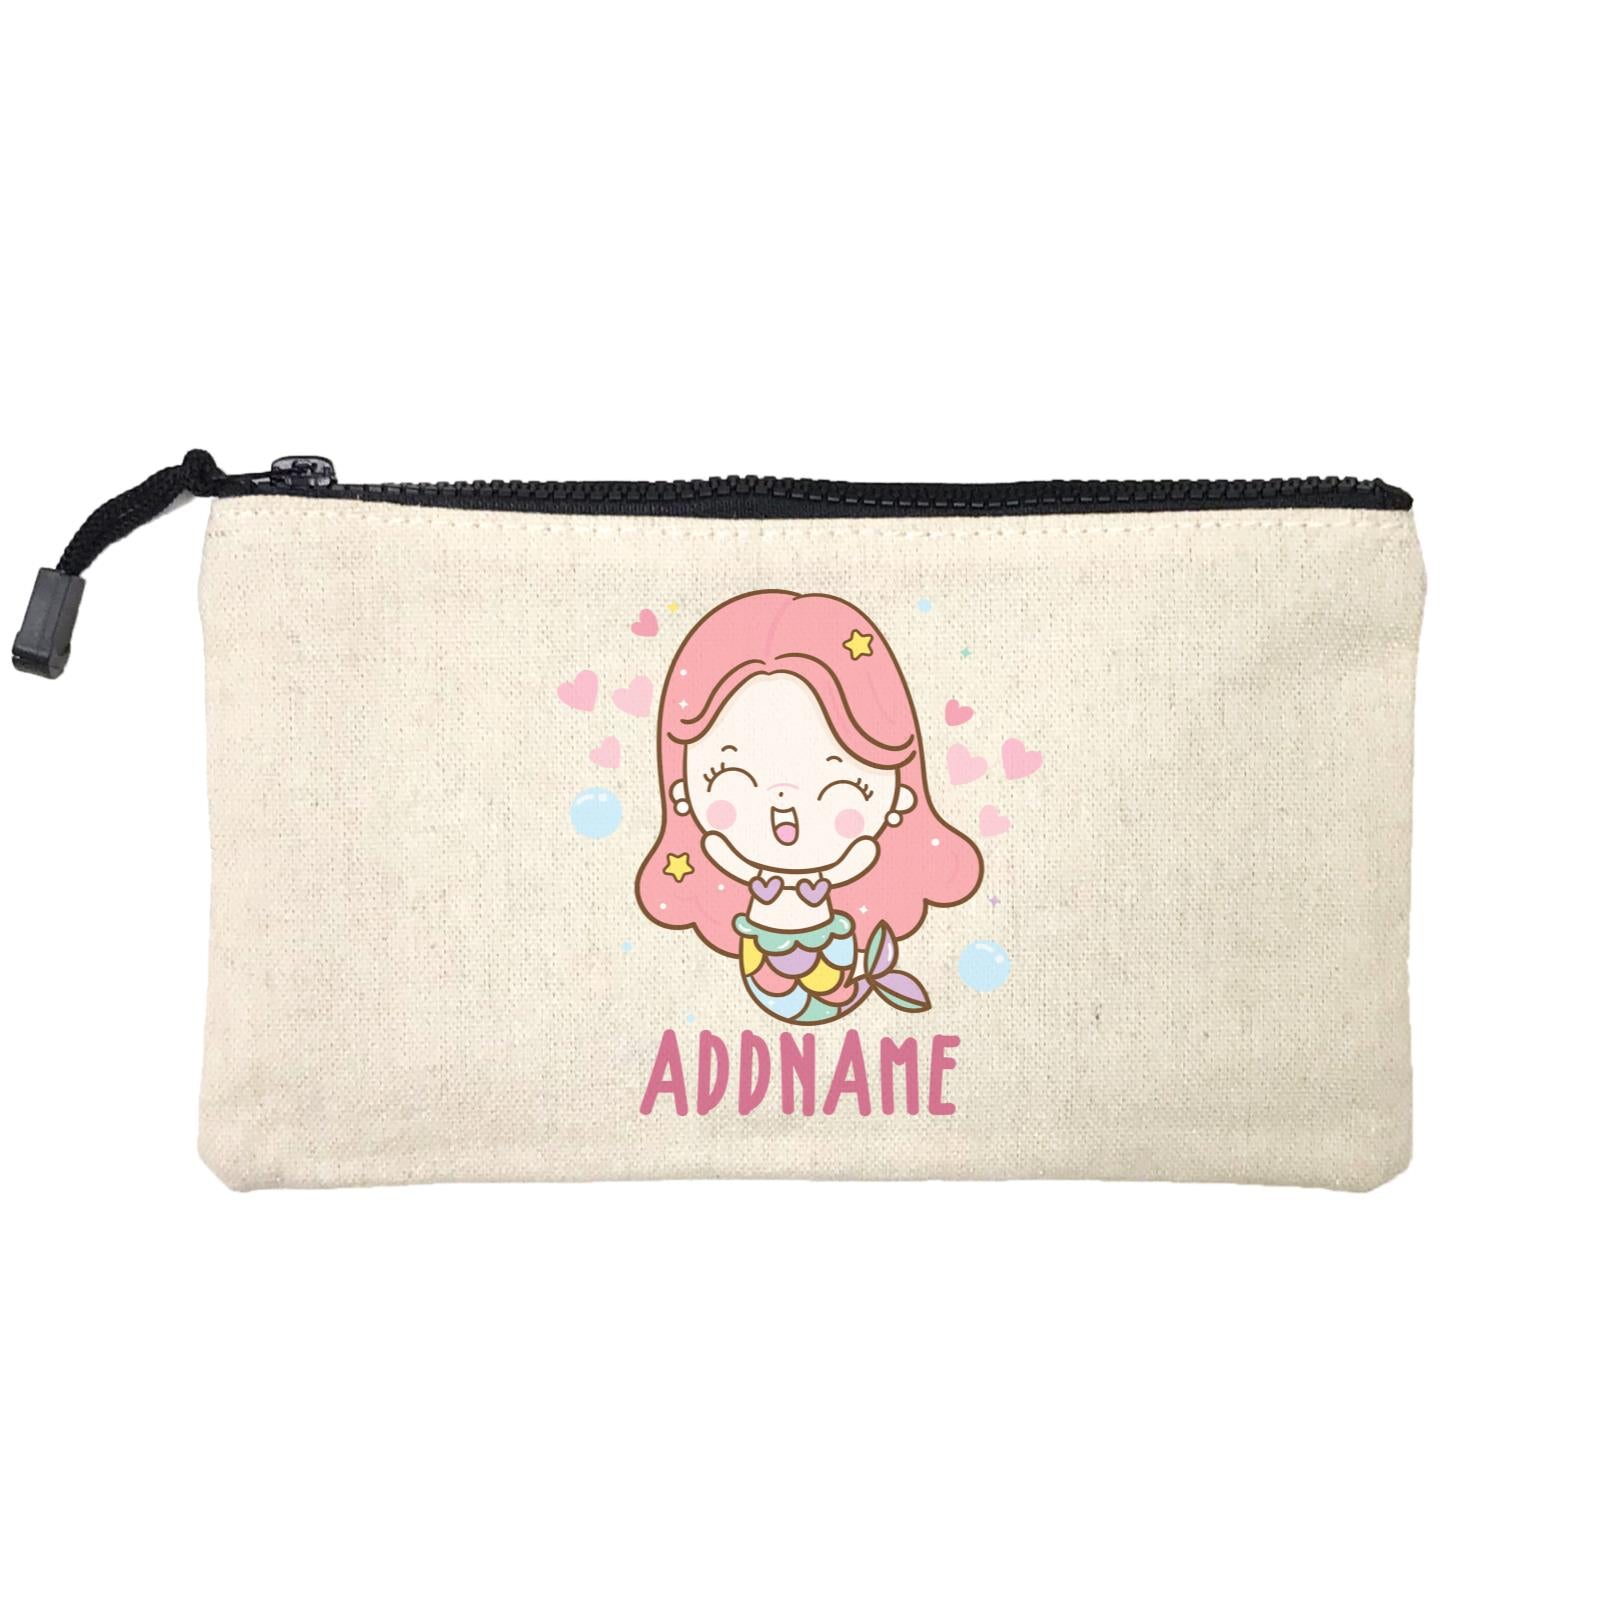 Unicorn And Princess Series Cute Happy Mermaid Girl Addname Mini Accessories Stationery Pouch